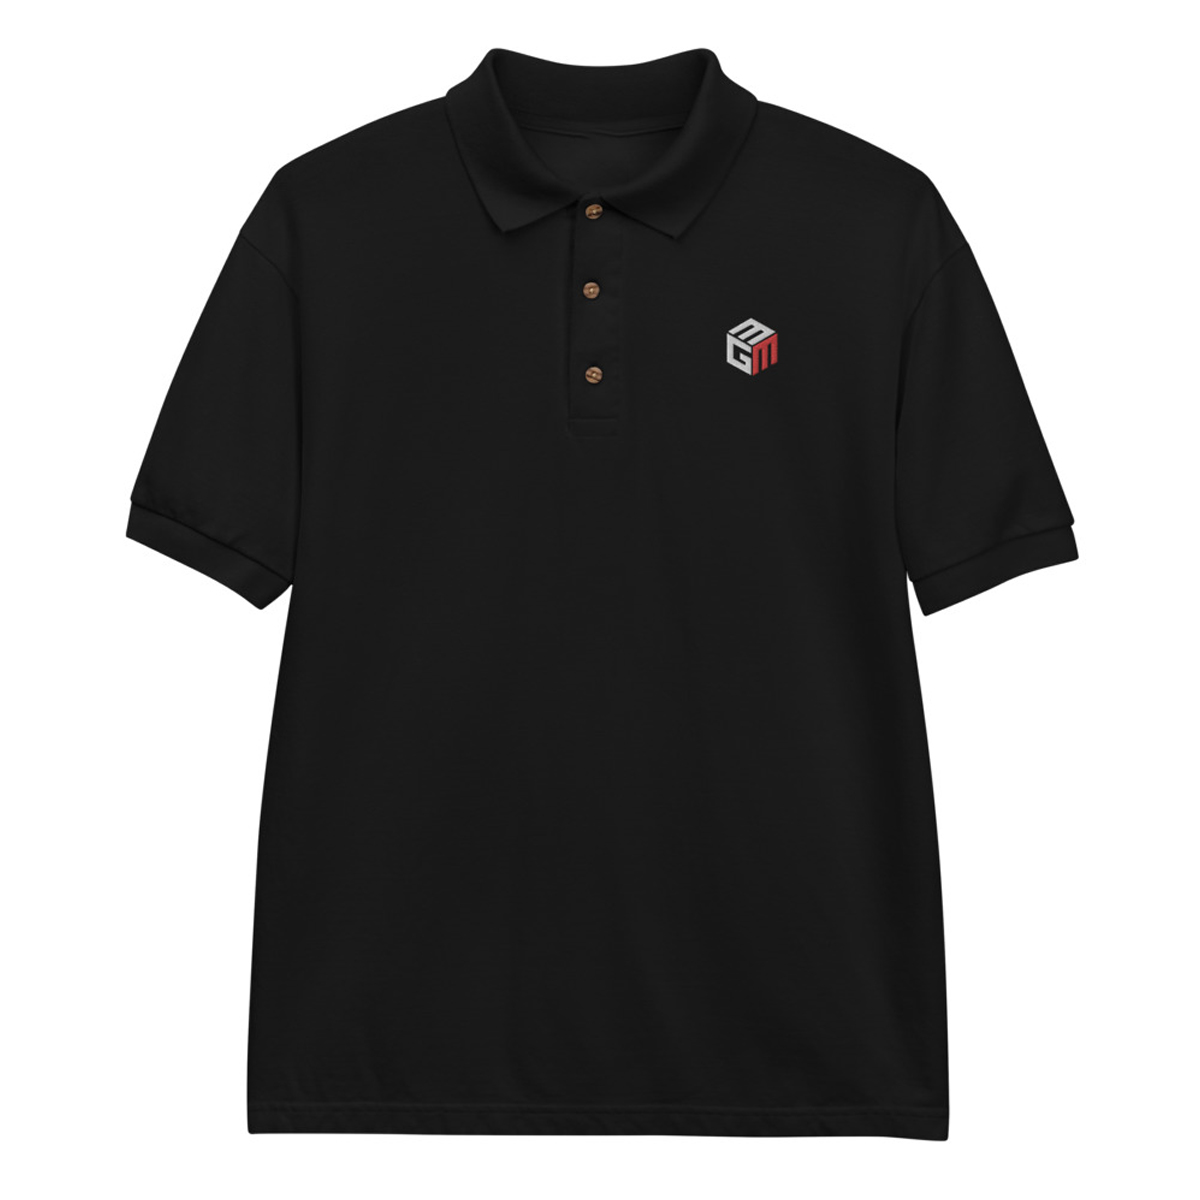 Mixed Games Movement Embroidered Poker Polo Shirt-Black